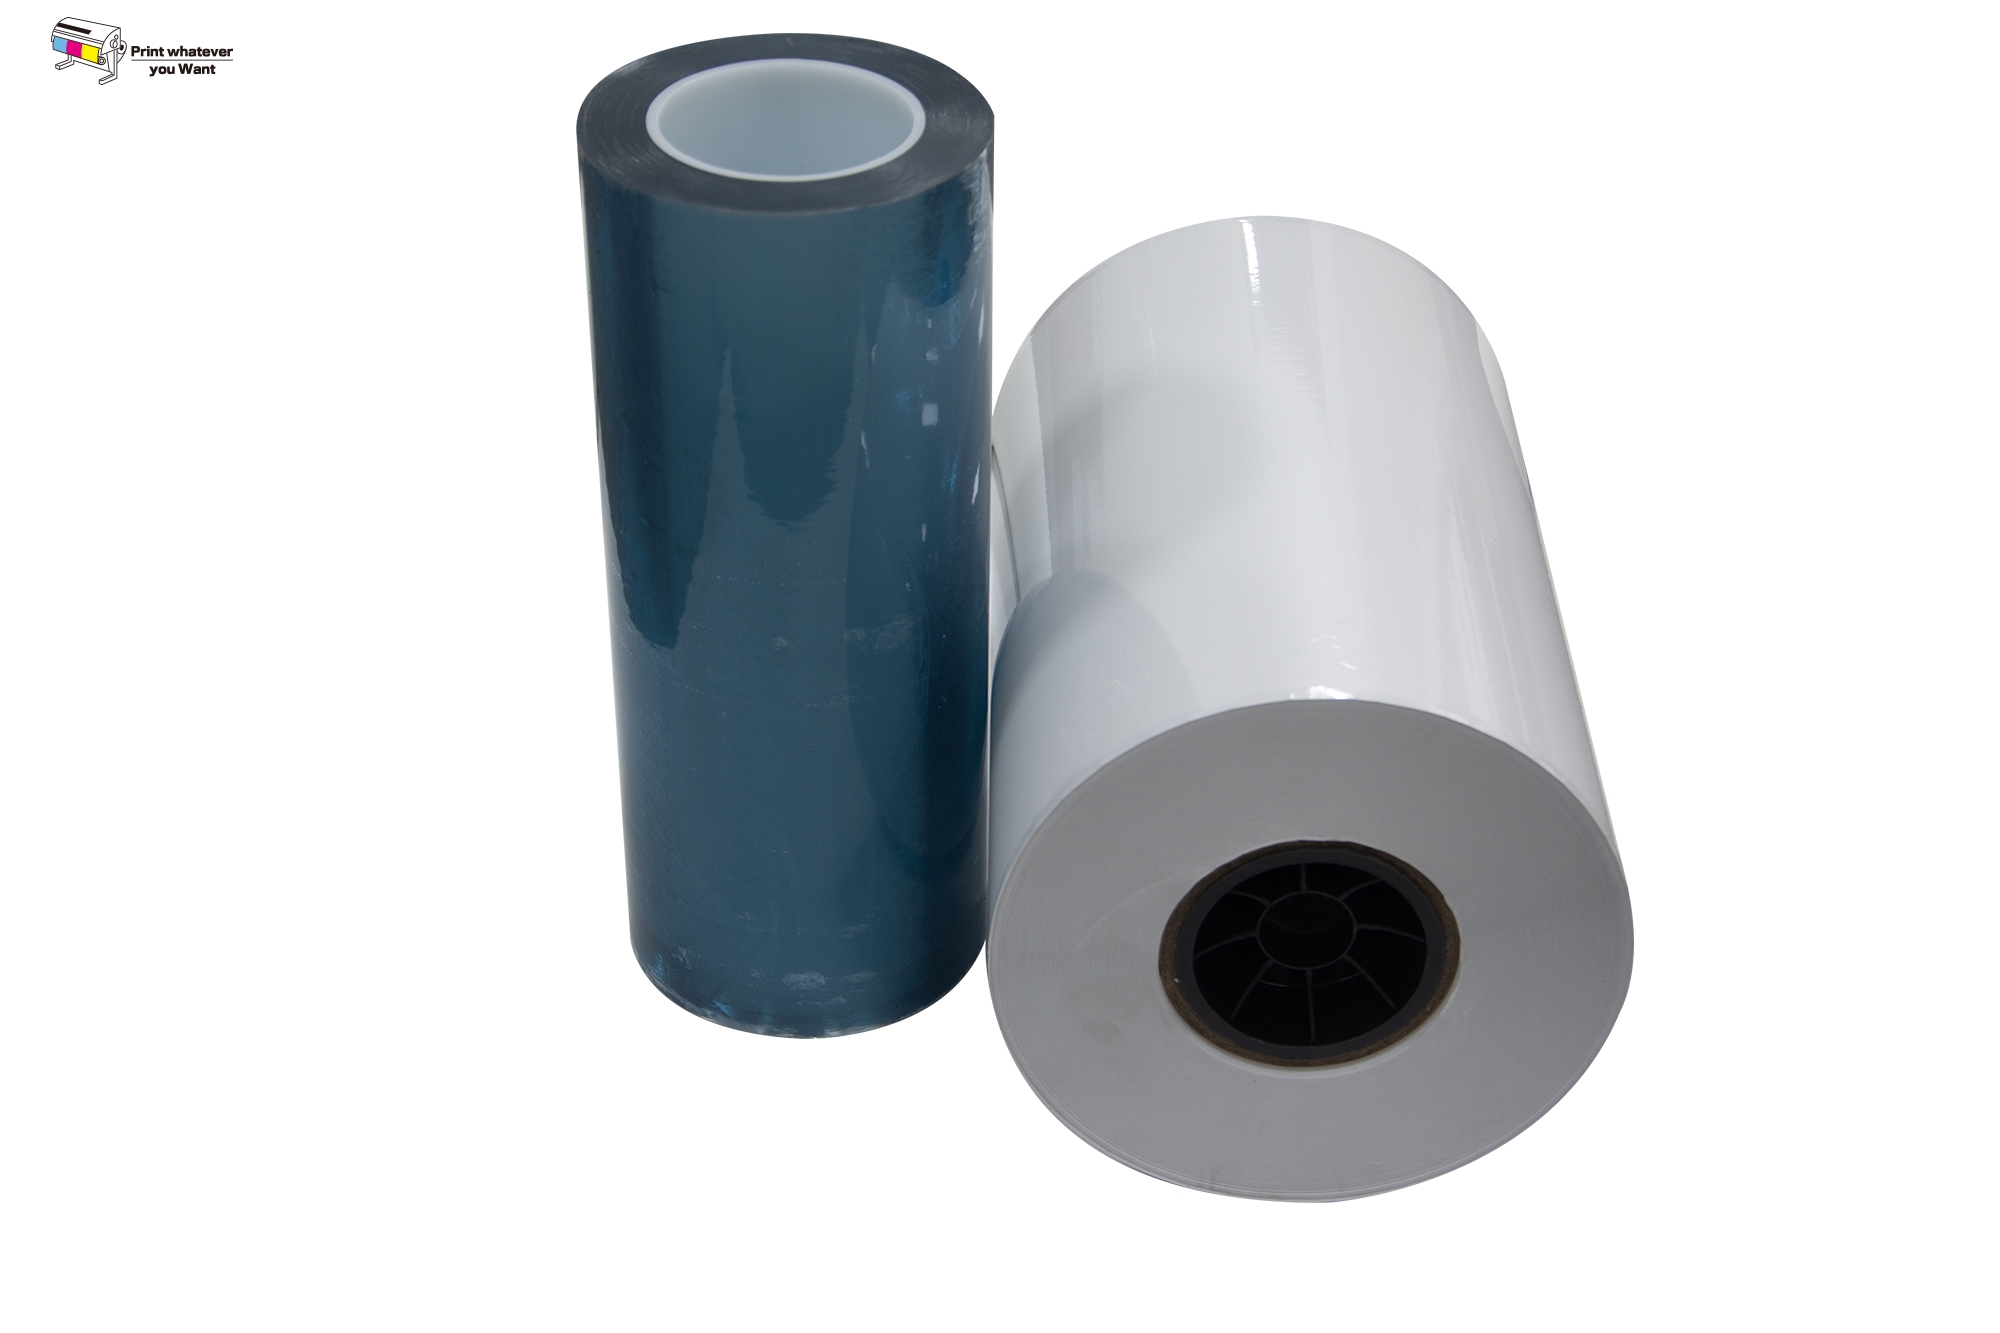 100 Package of UV Adhesion 'A' Sheets & 1 Roll of UV 'B' Transfer Paper |  Colman and Company